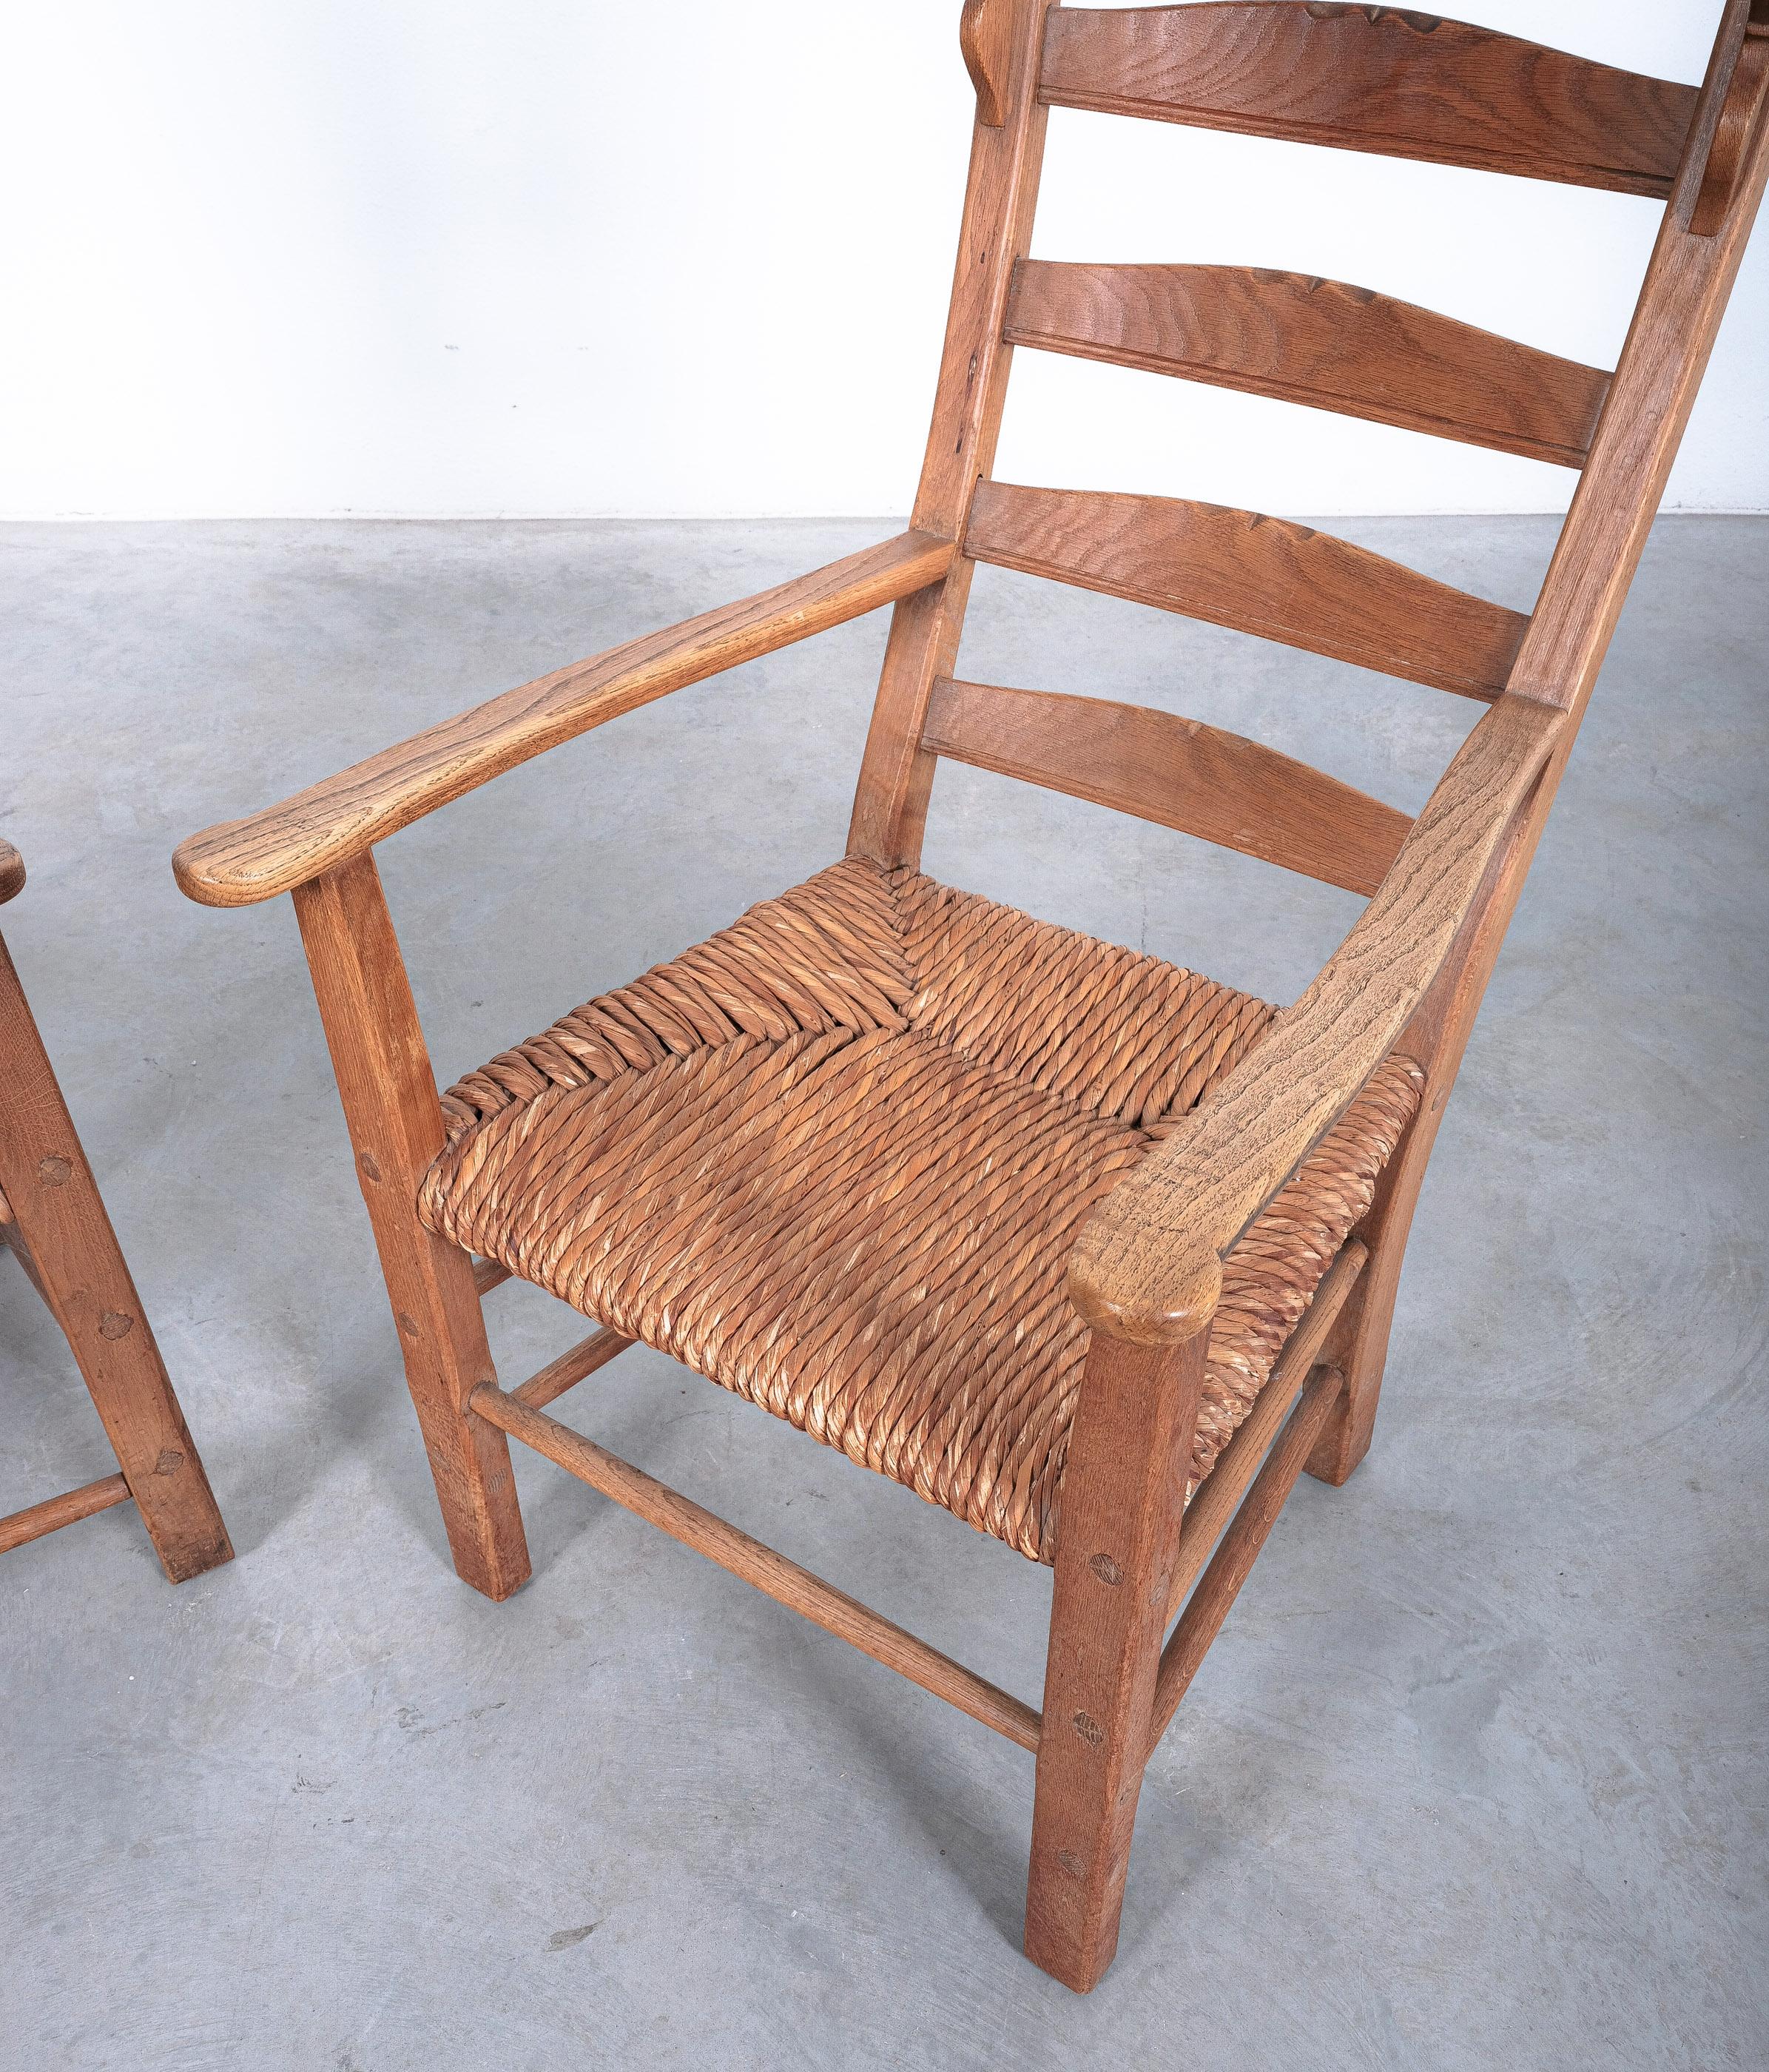 Pair of Rustic Rope Lounge Chairs Beech Wood, France, 1950 For Sale 5